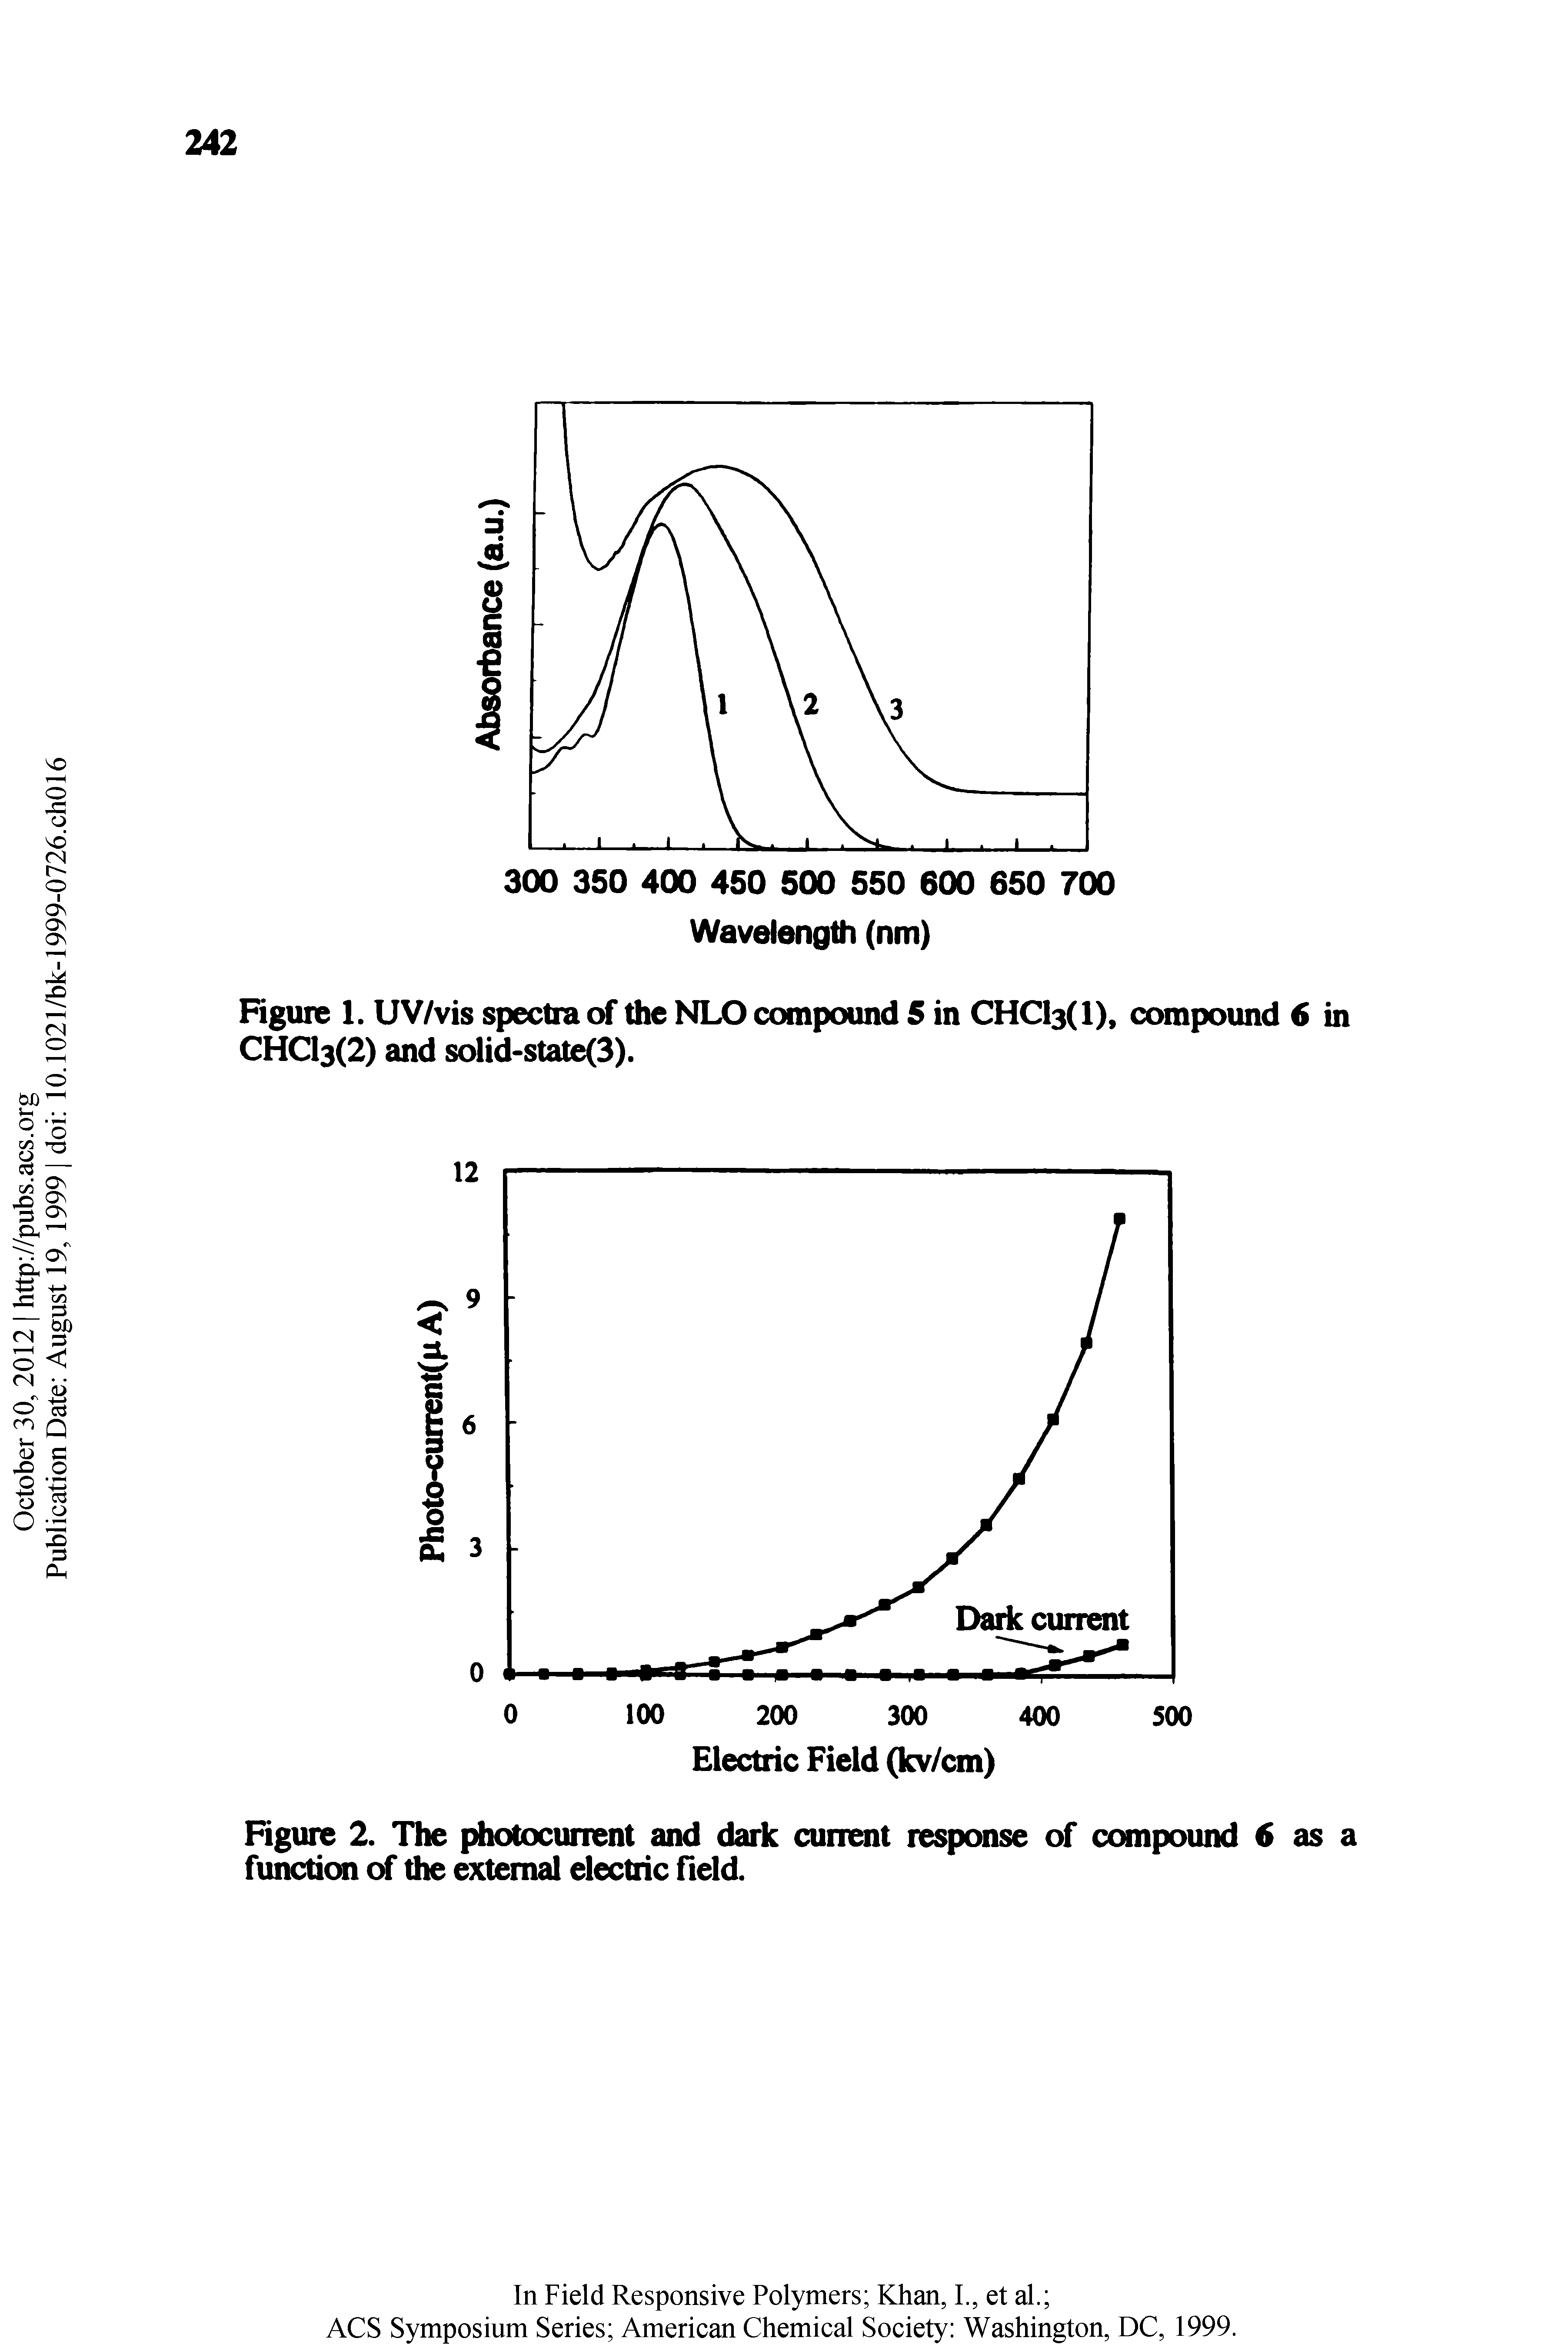 Figure 2. The photocurrent and dark current response of compound 6 as a function of the external electric field.